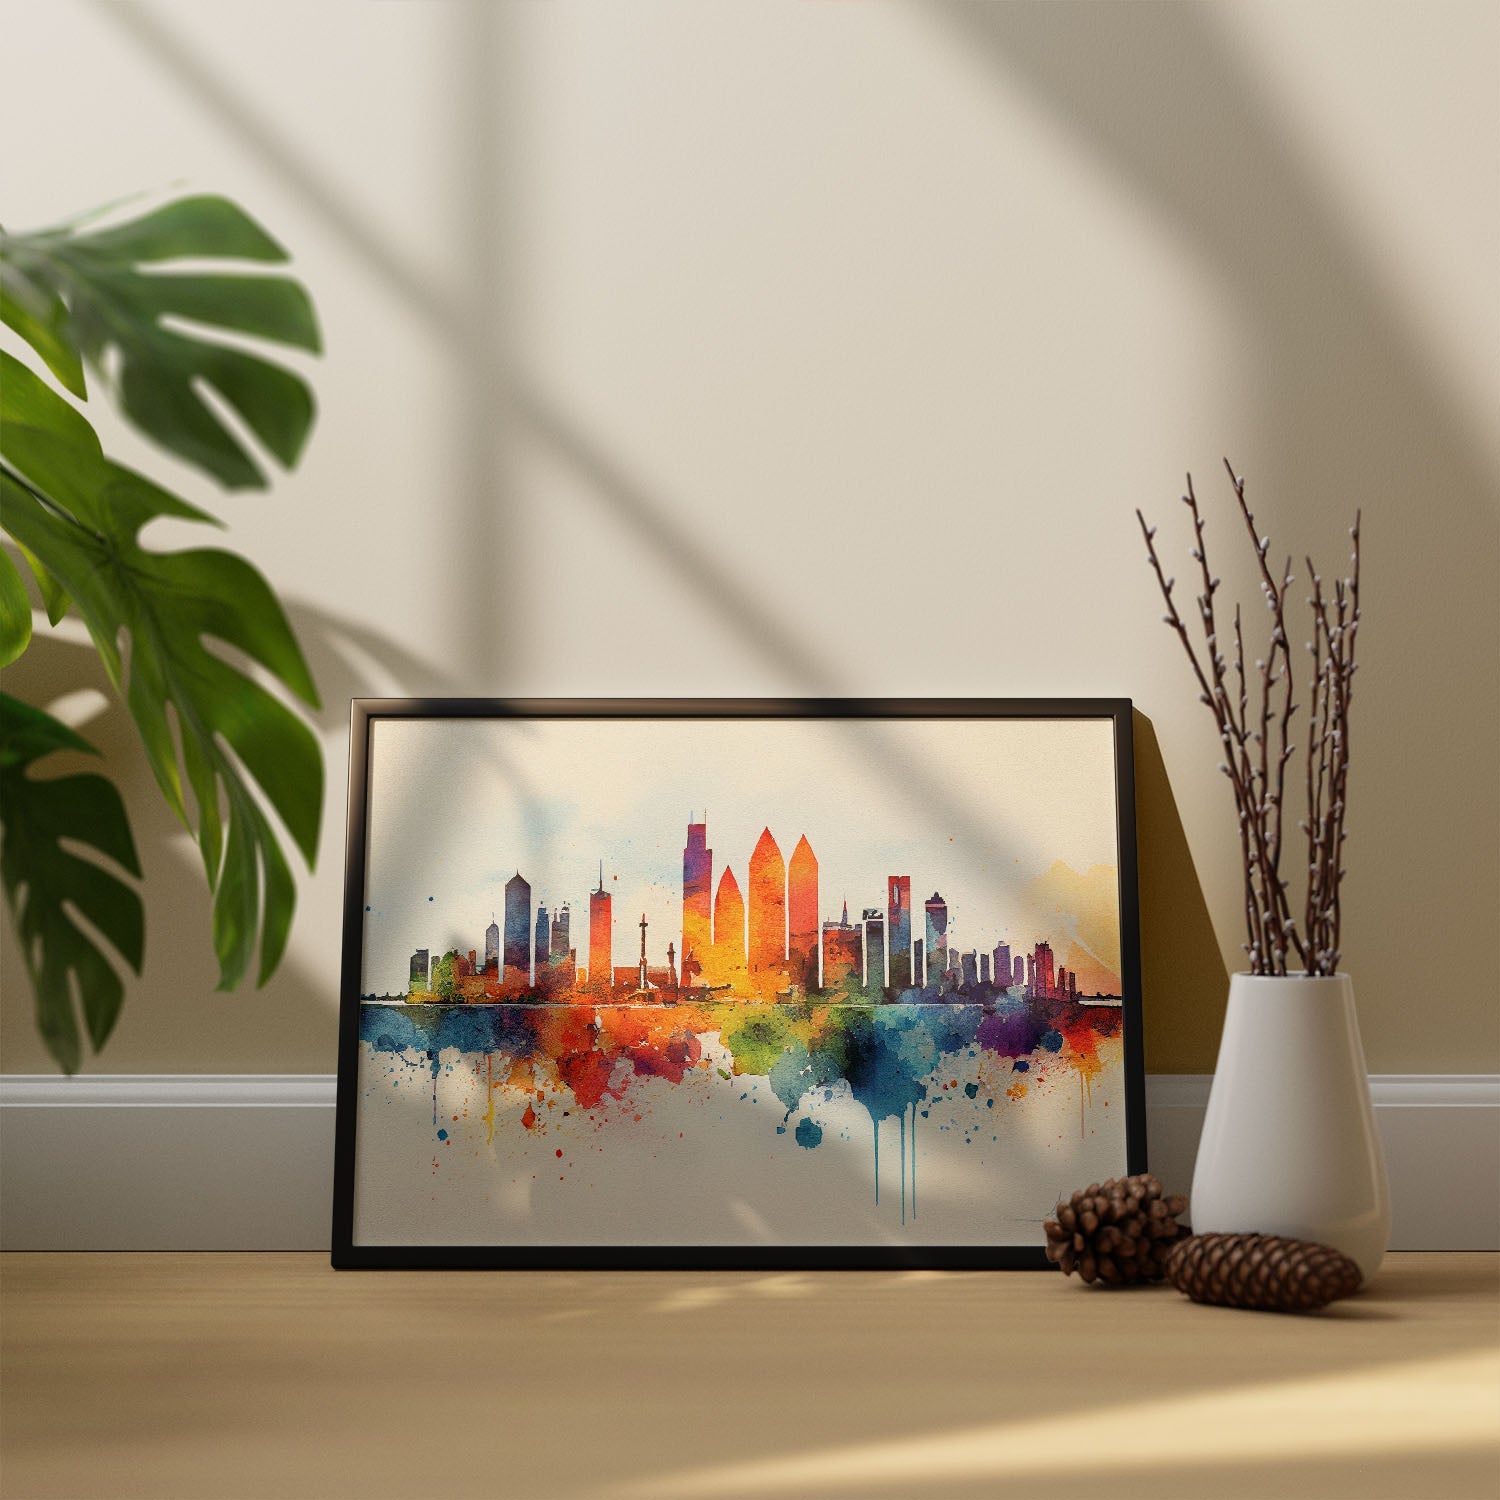 Nacnic watercolor of a skyline of the city of Abu Dhabi. Aesthetic Wall Art Prints for Bedroom or Living Room Design.-Artwork-Nacnic-A4-Sin Marco-Nacnic Estudio SL